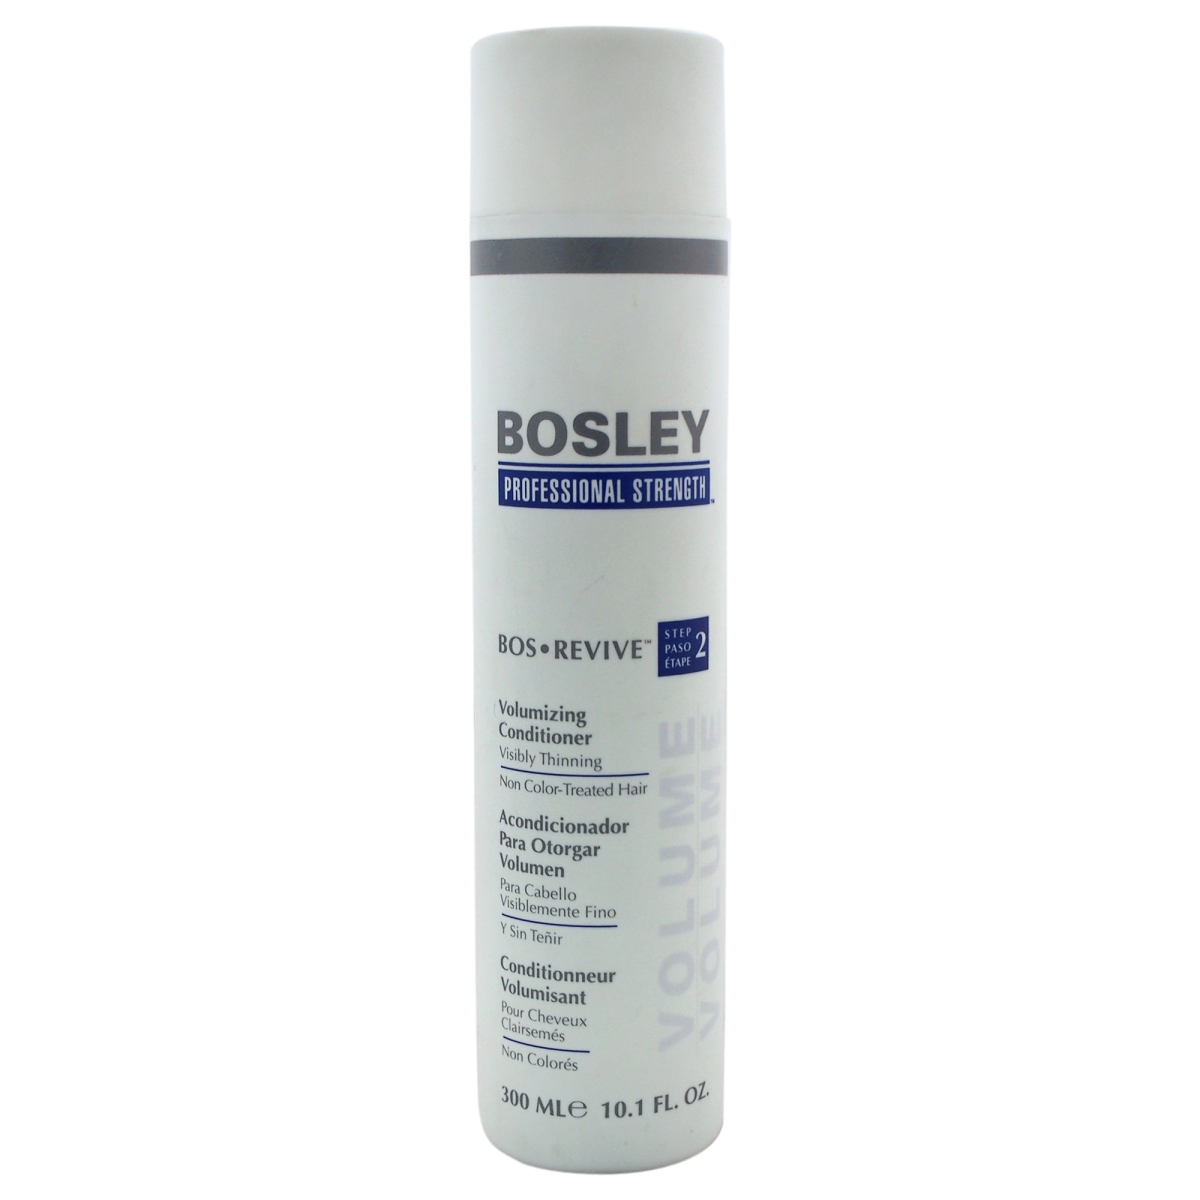 U-hc-6187 10.1 Oz Unisex Bos Revive Volumizing Visibly Thinning Non Color-treated Hair Conditioner